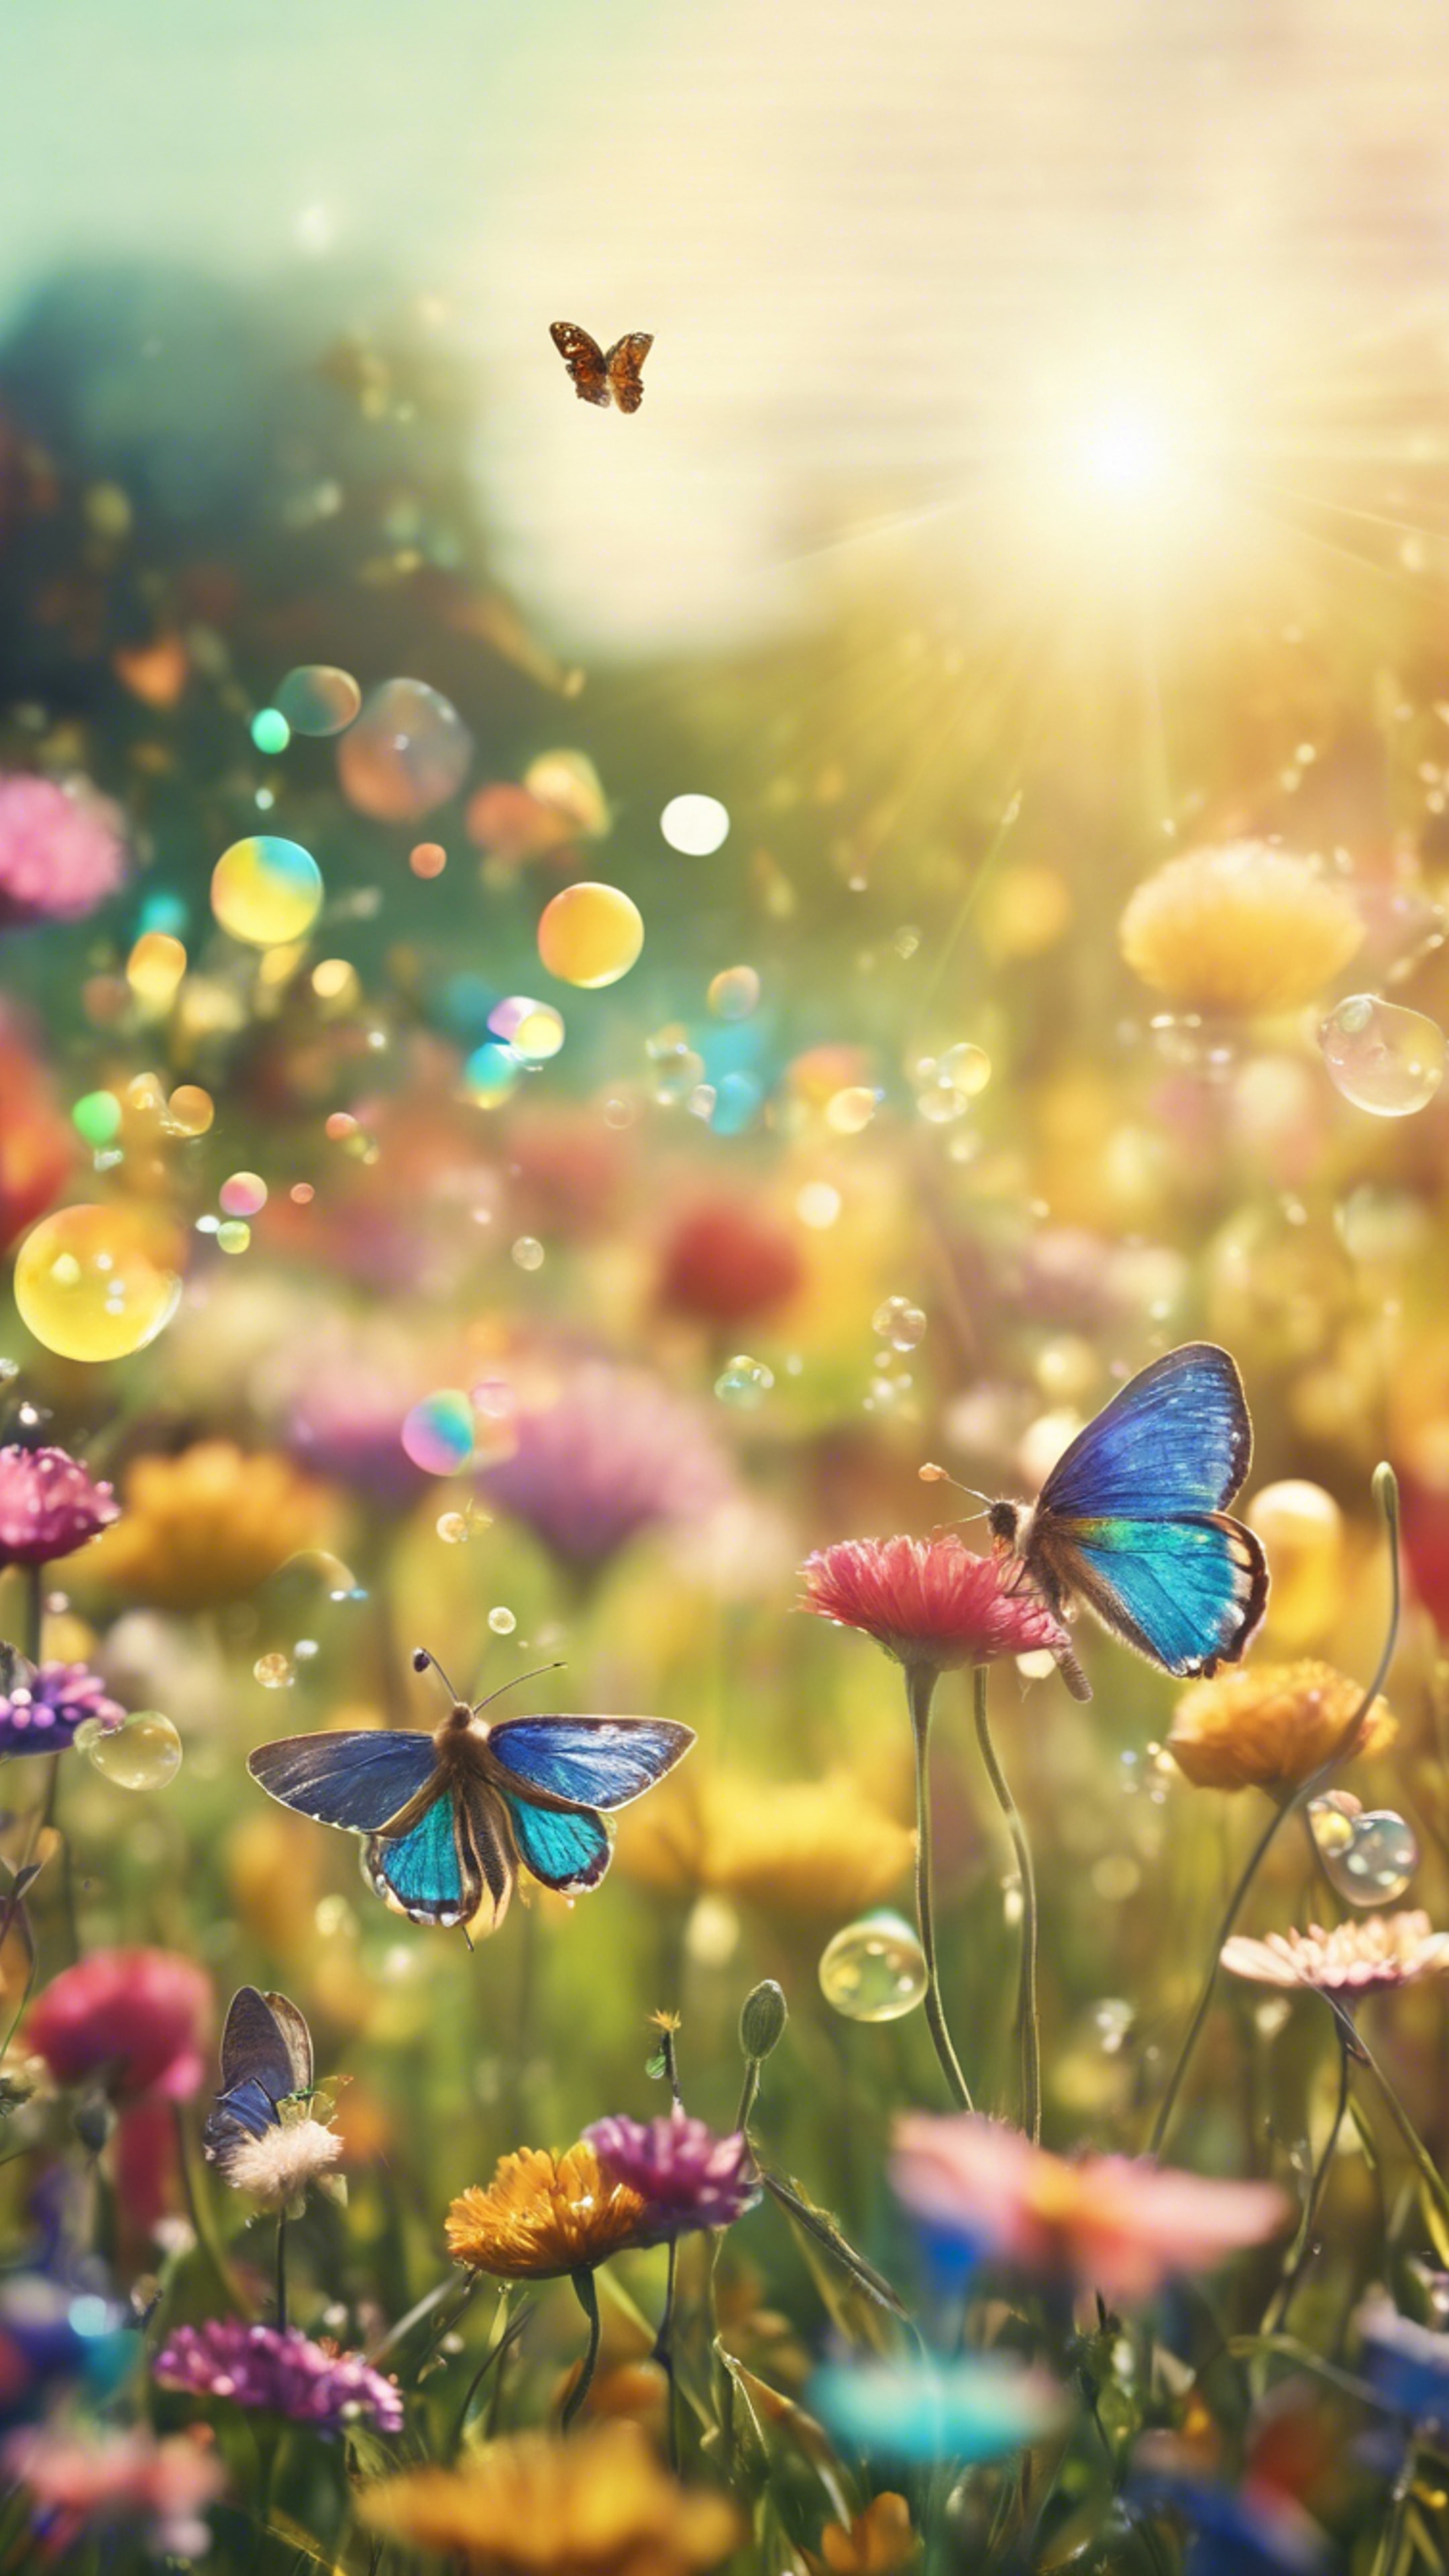 A child's dream of a playful, sunny meadow filled with rainbow butterflies and bubble-blowing bumblebees. Tapeta[6664242c62b24fa88676]